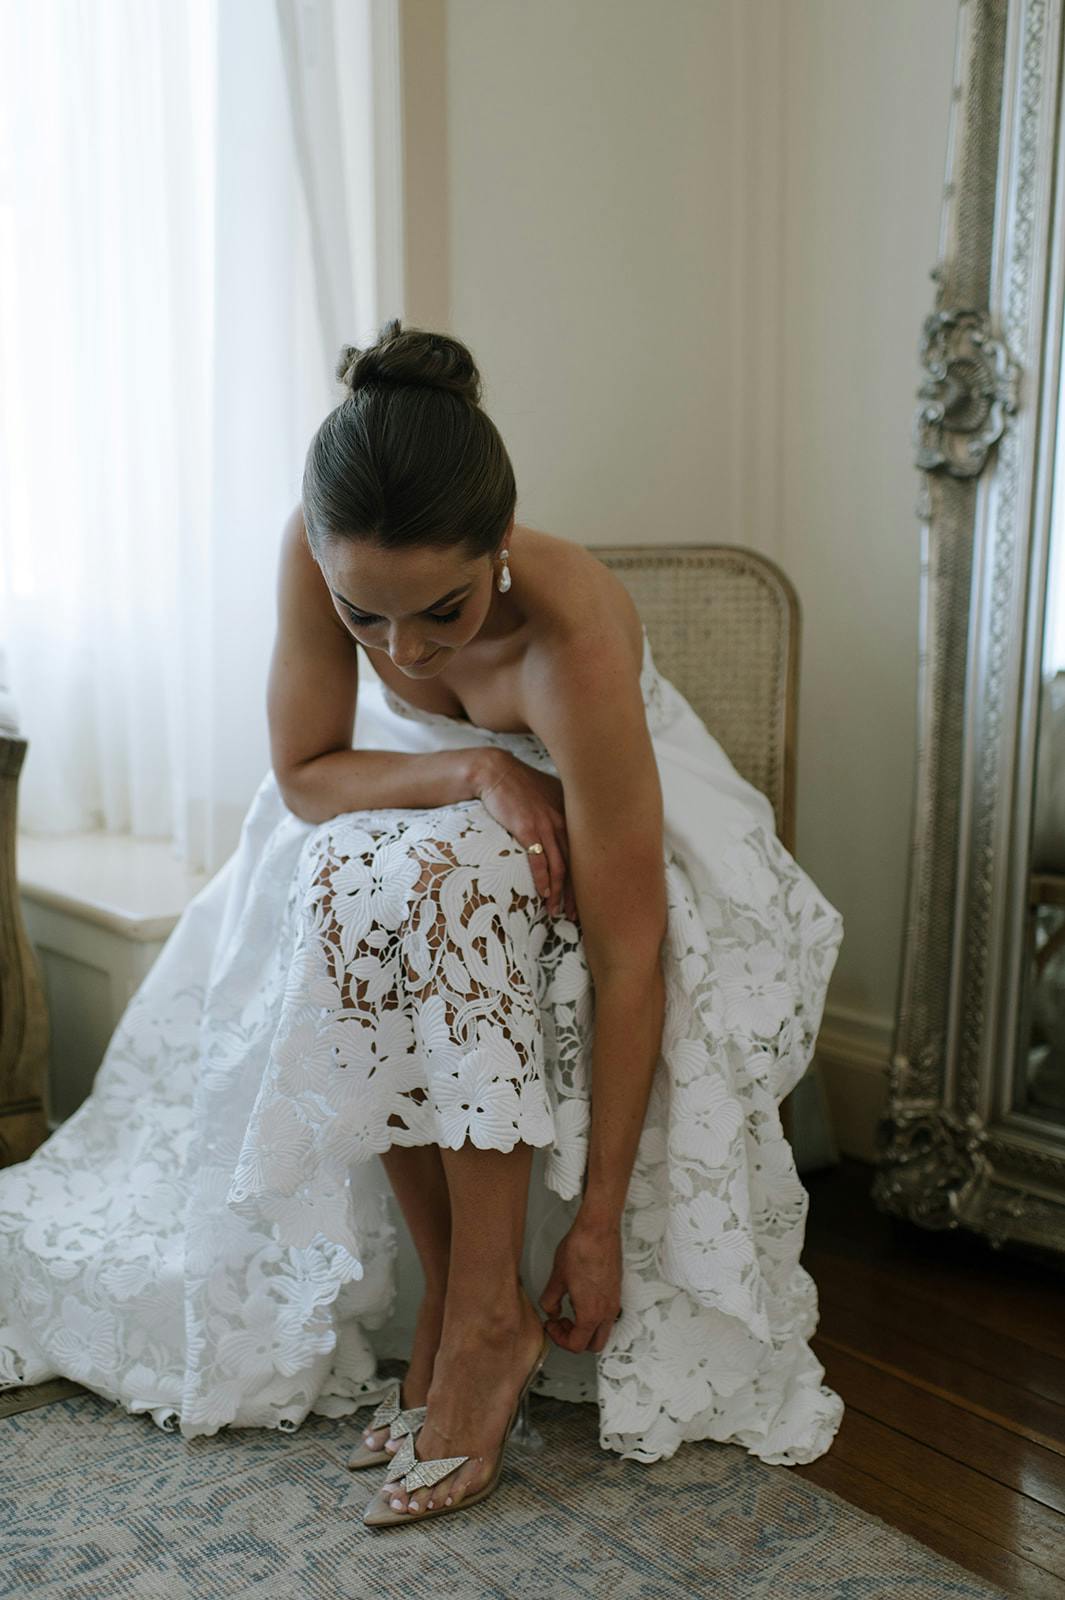 A bride in a white lace wedding dress sits on a wicker chair, bending down to adjust her shoe. She has her hair styled in an elegant updo and is in a softly lit room with a large window featuring sheer white curtains. An ornate large mirror stands next to her.